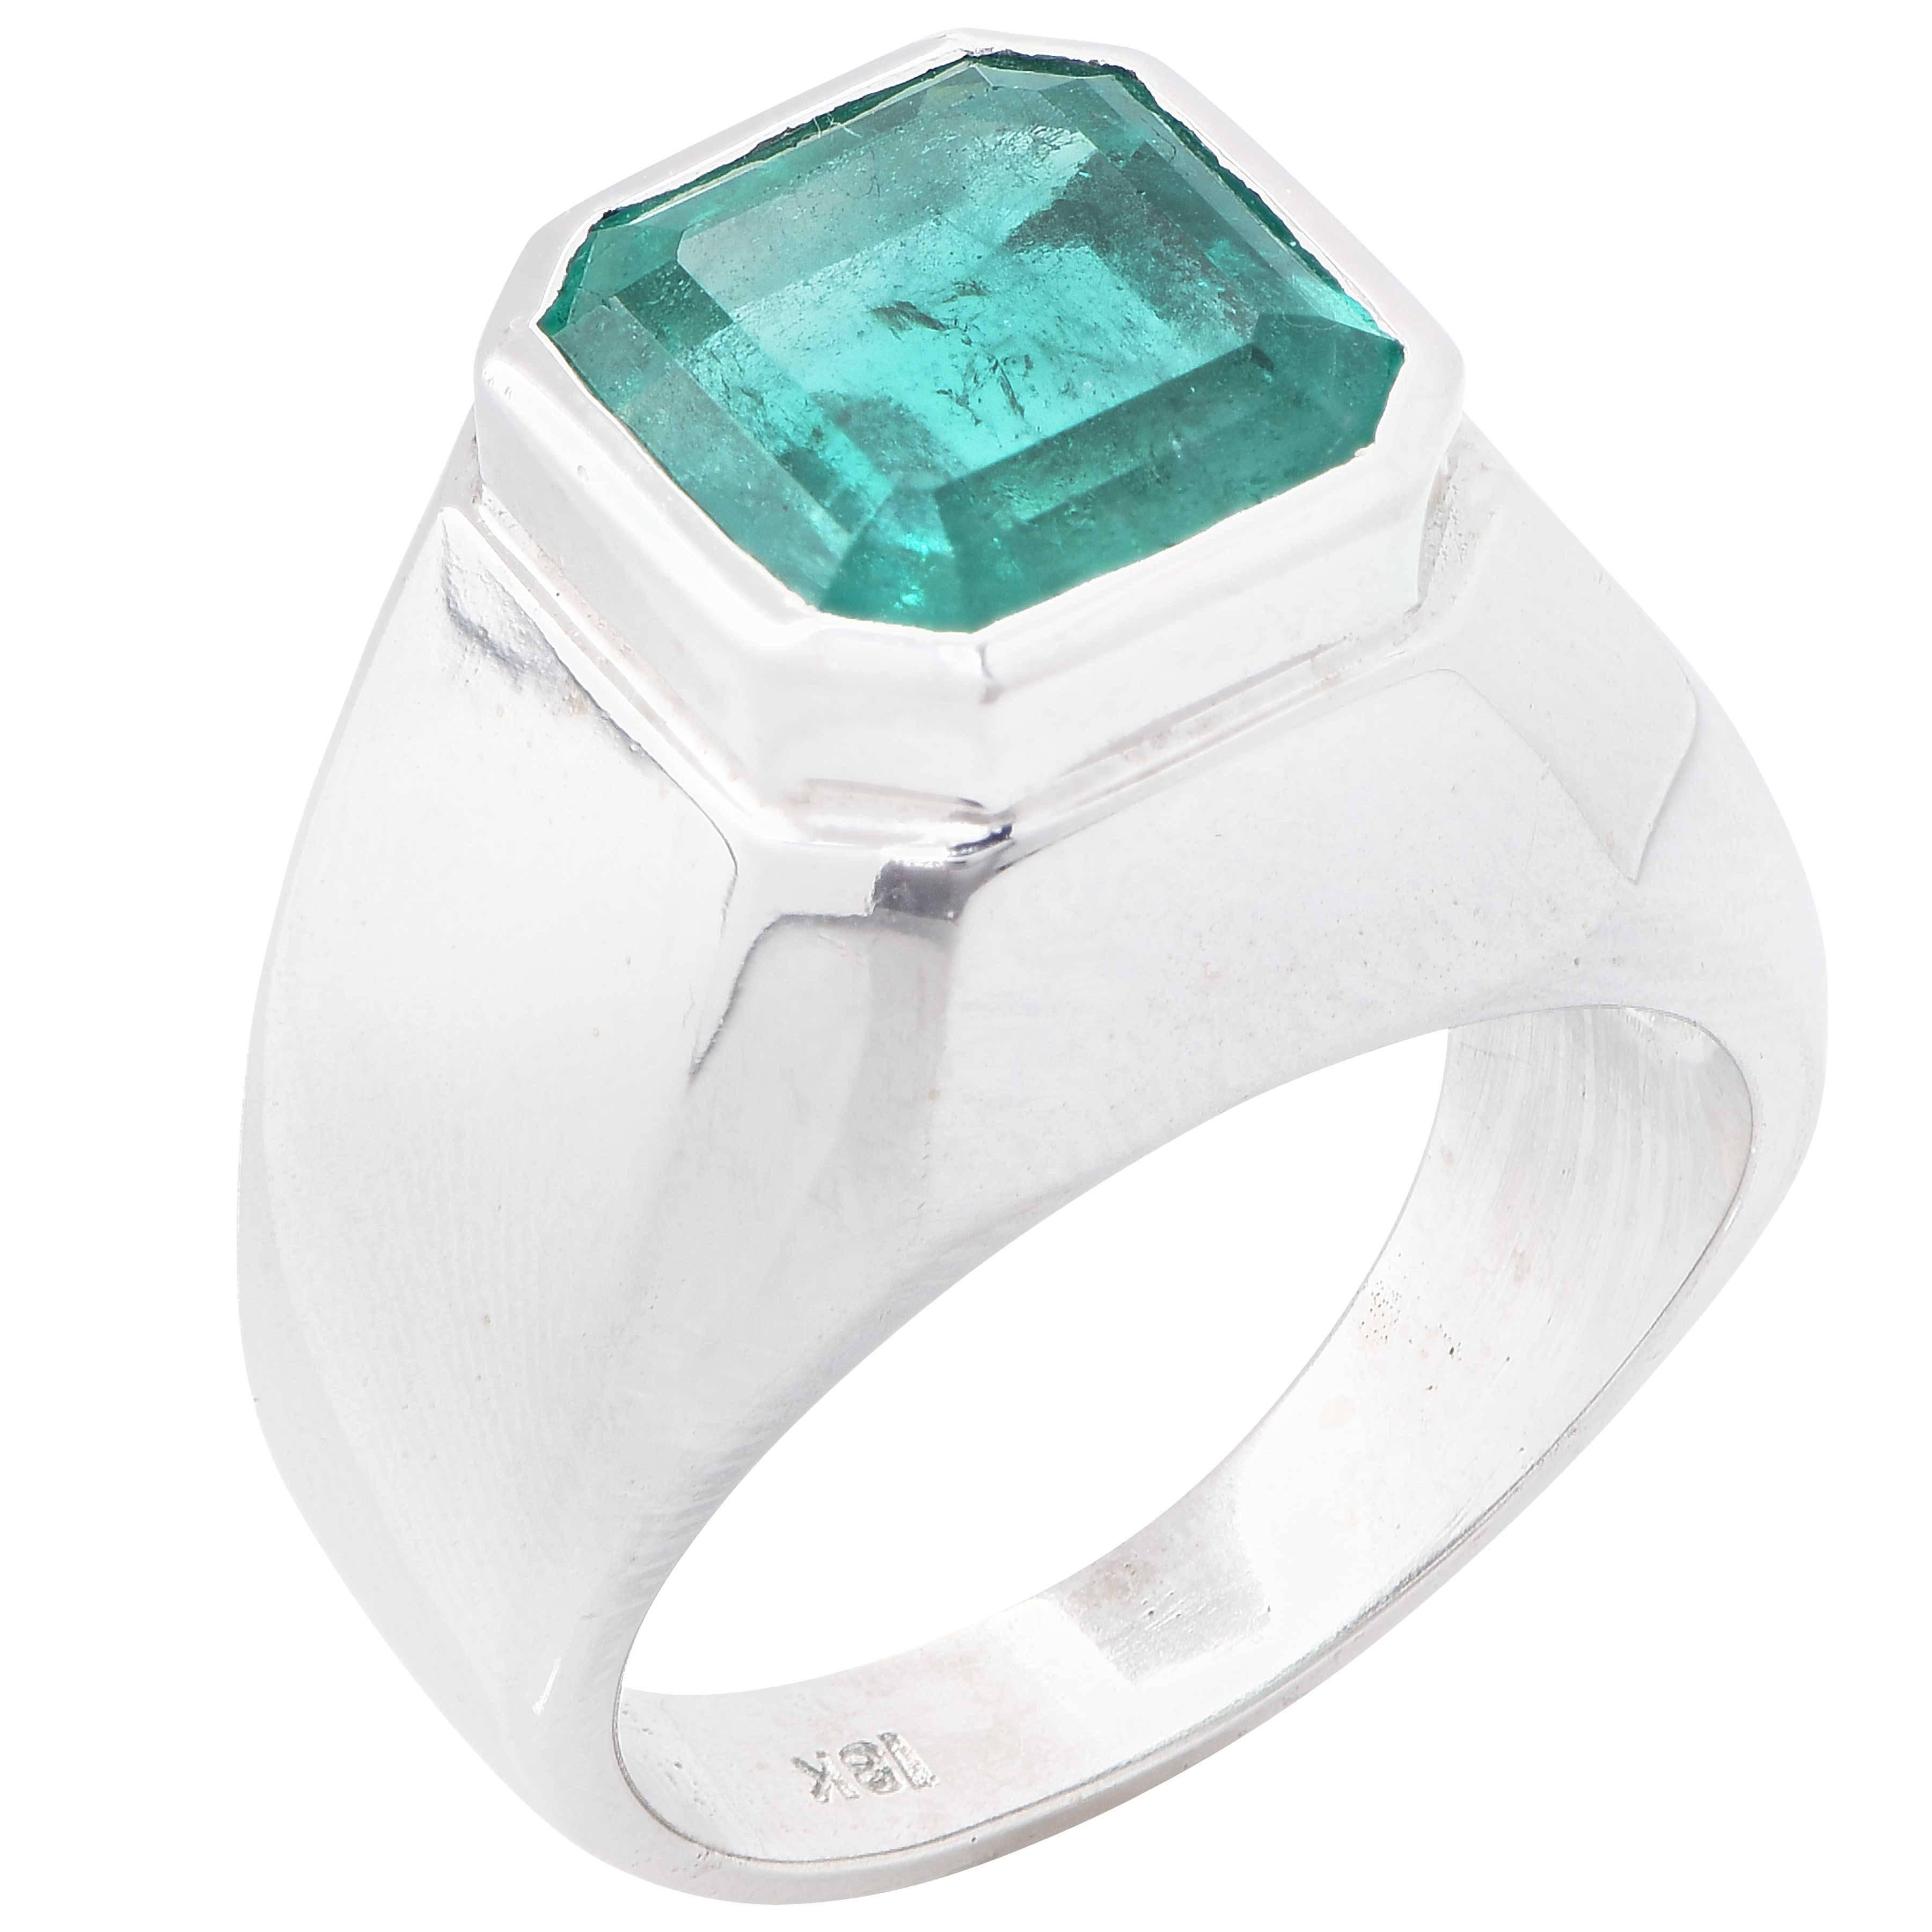 Classic Men's Emerald Ring featuring an emerald cut emerald weighing approximately 8 carats set in 18 Kt White Gold.

Ring Size: 9 (can be sized)
Metal Type: 18 Kt White Gold ( stamped and/or tested)
Metal Weight: 20.1 Grams